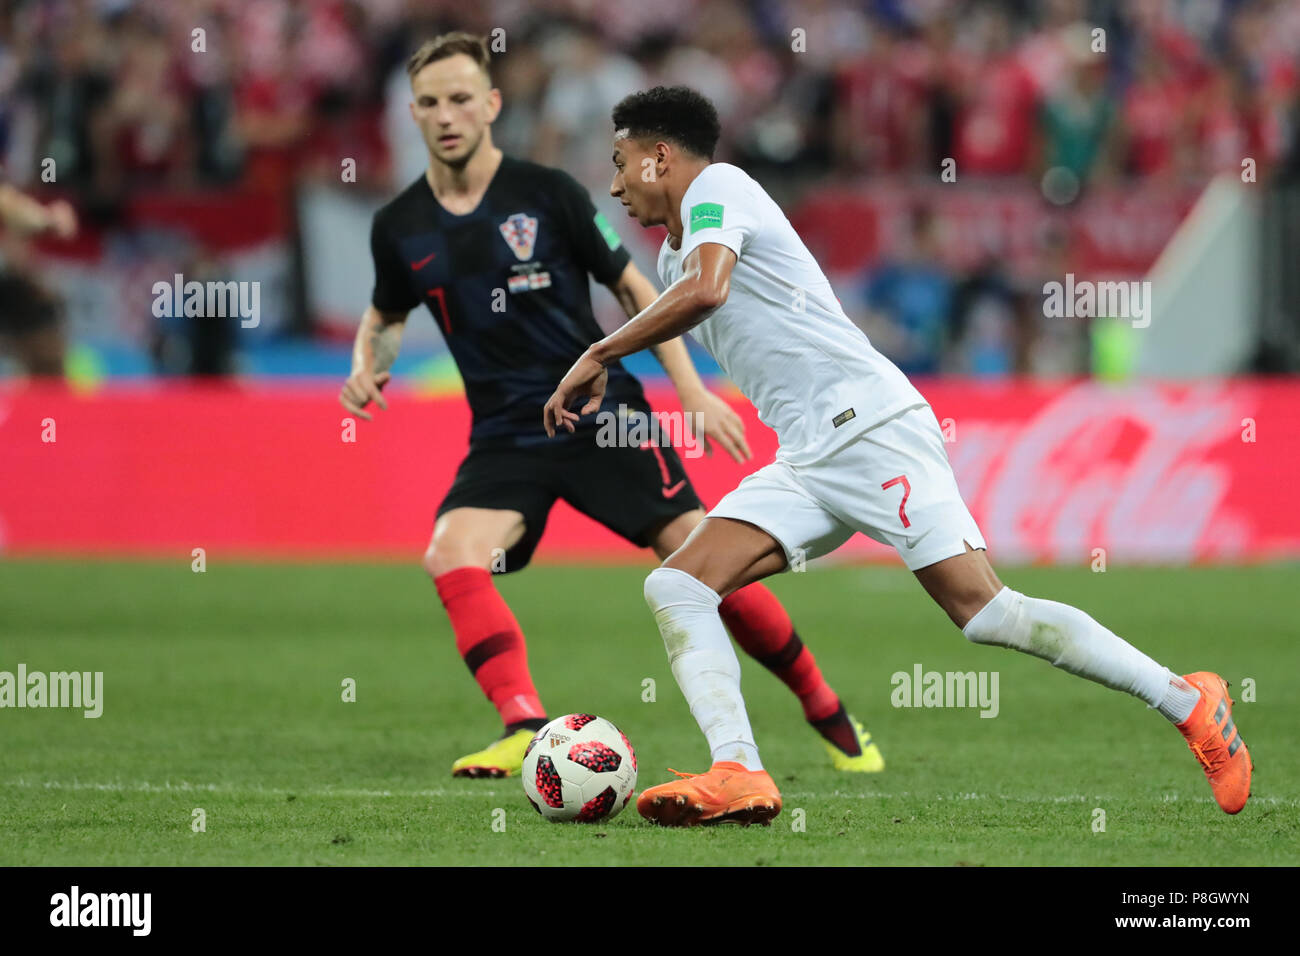 MOSCOW, RUSSIA - JULY 11: Jesse Lingard (R) of England and Ivan Rakitic of Croatia vie for the ball during the 2018 FIFA World Cup Russia Semi Final match between England and Croatia at Luzhniki Stadium on July 11, 2018 in Moscow, Russia. MB Media Stock Photo